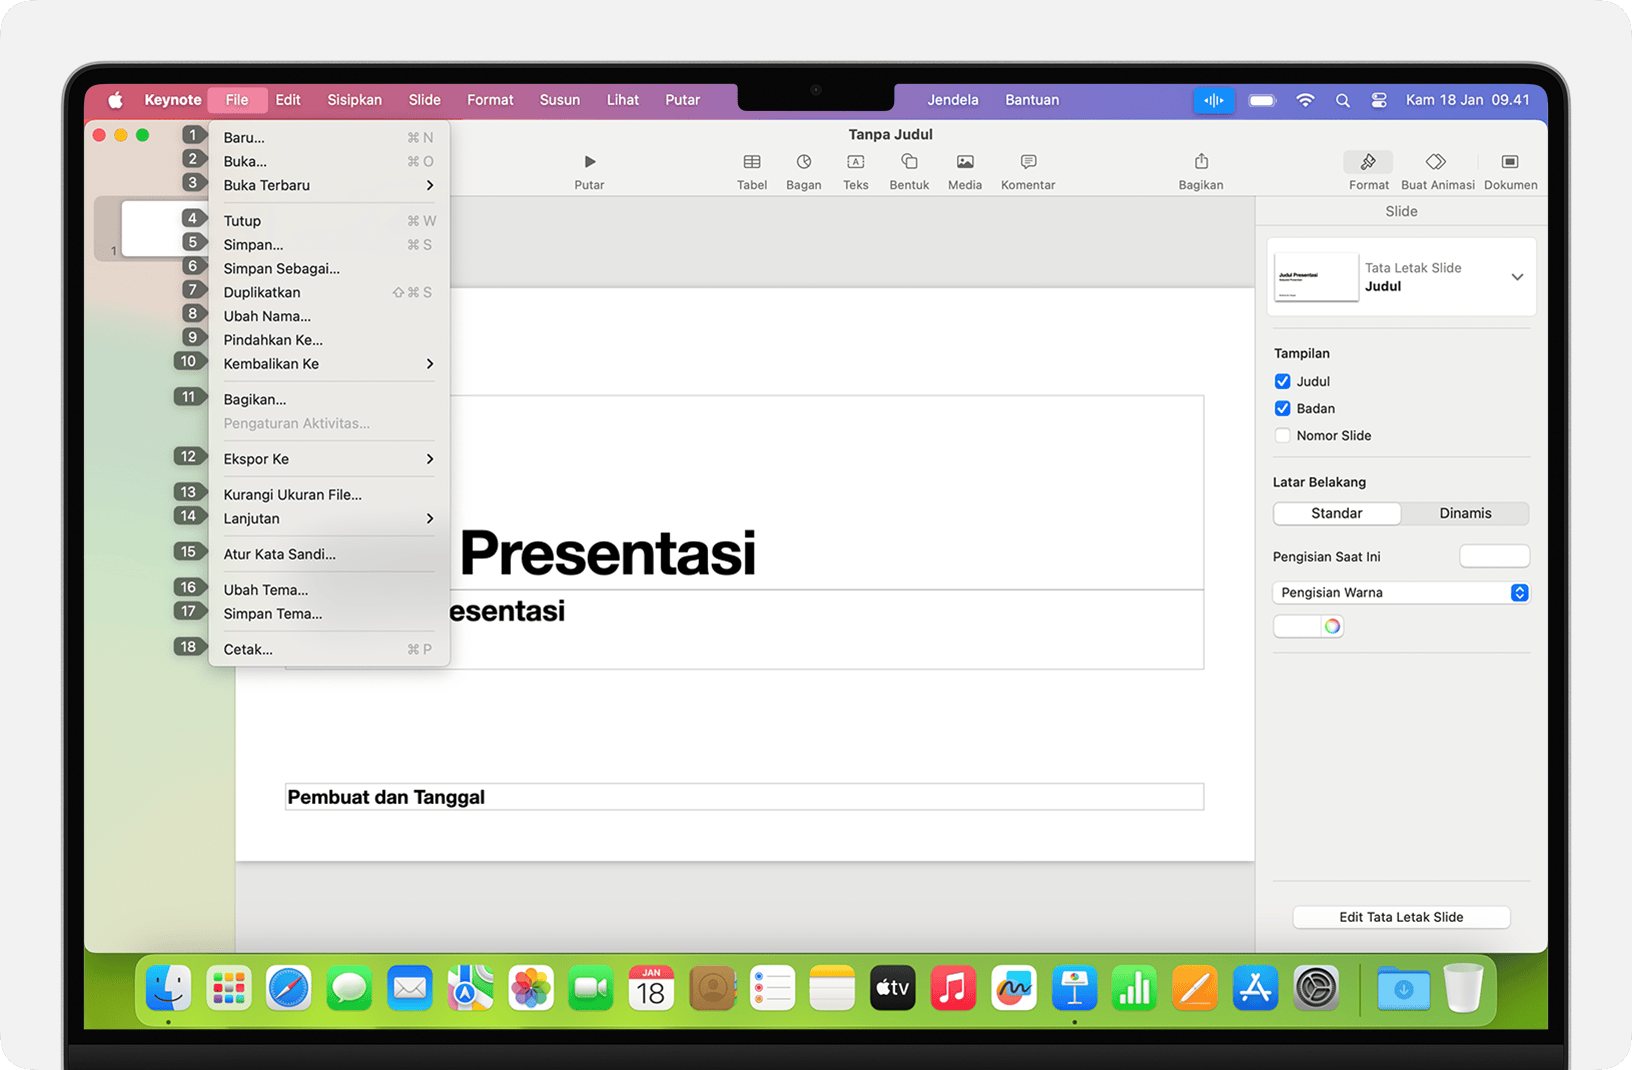 macos-sonoma-macbook-pro-voice-control-show-numbers